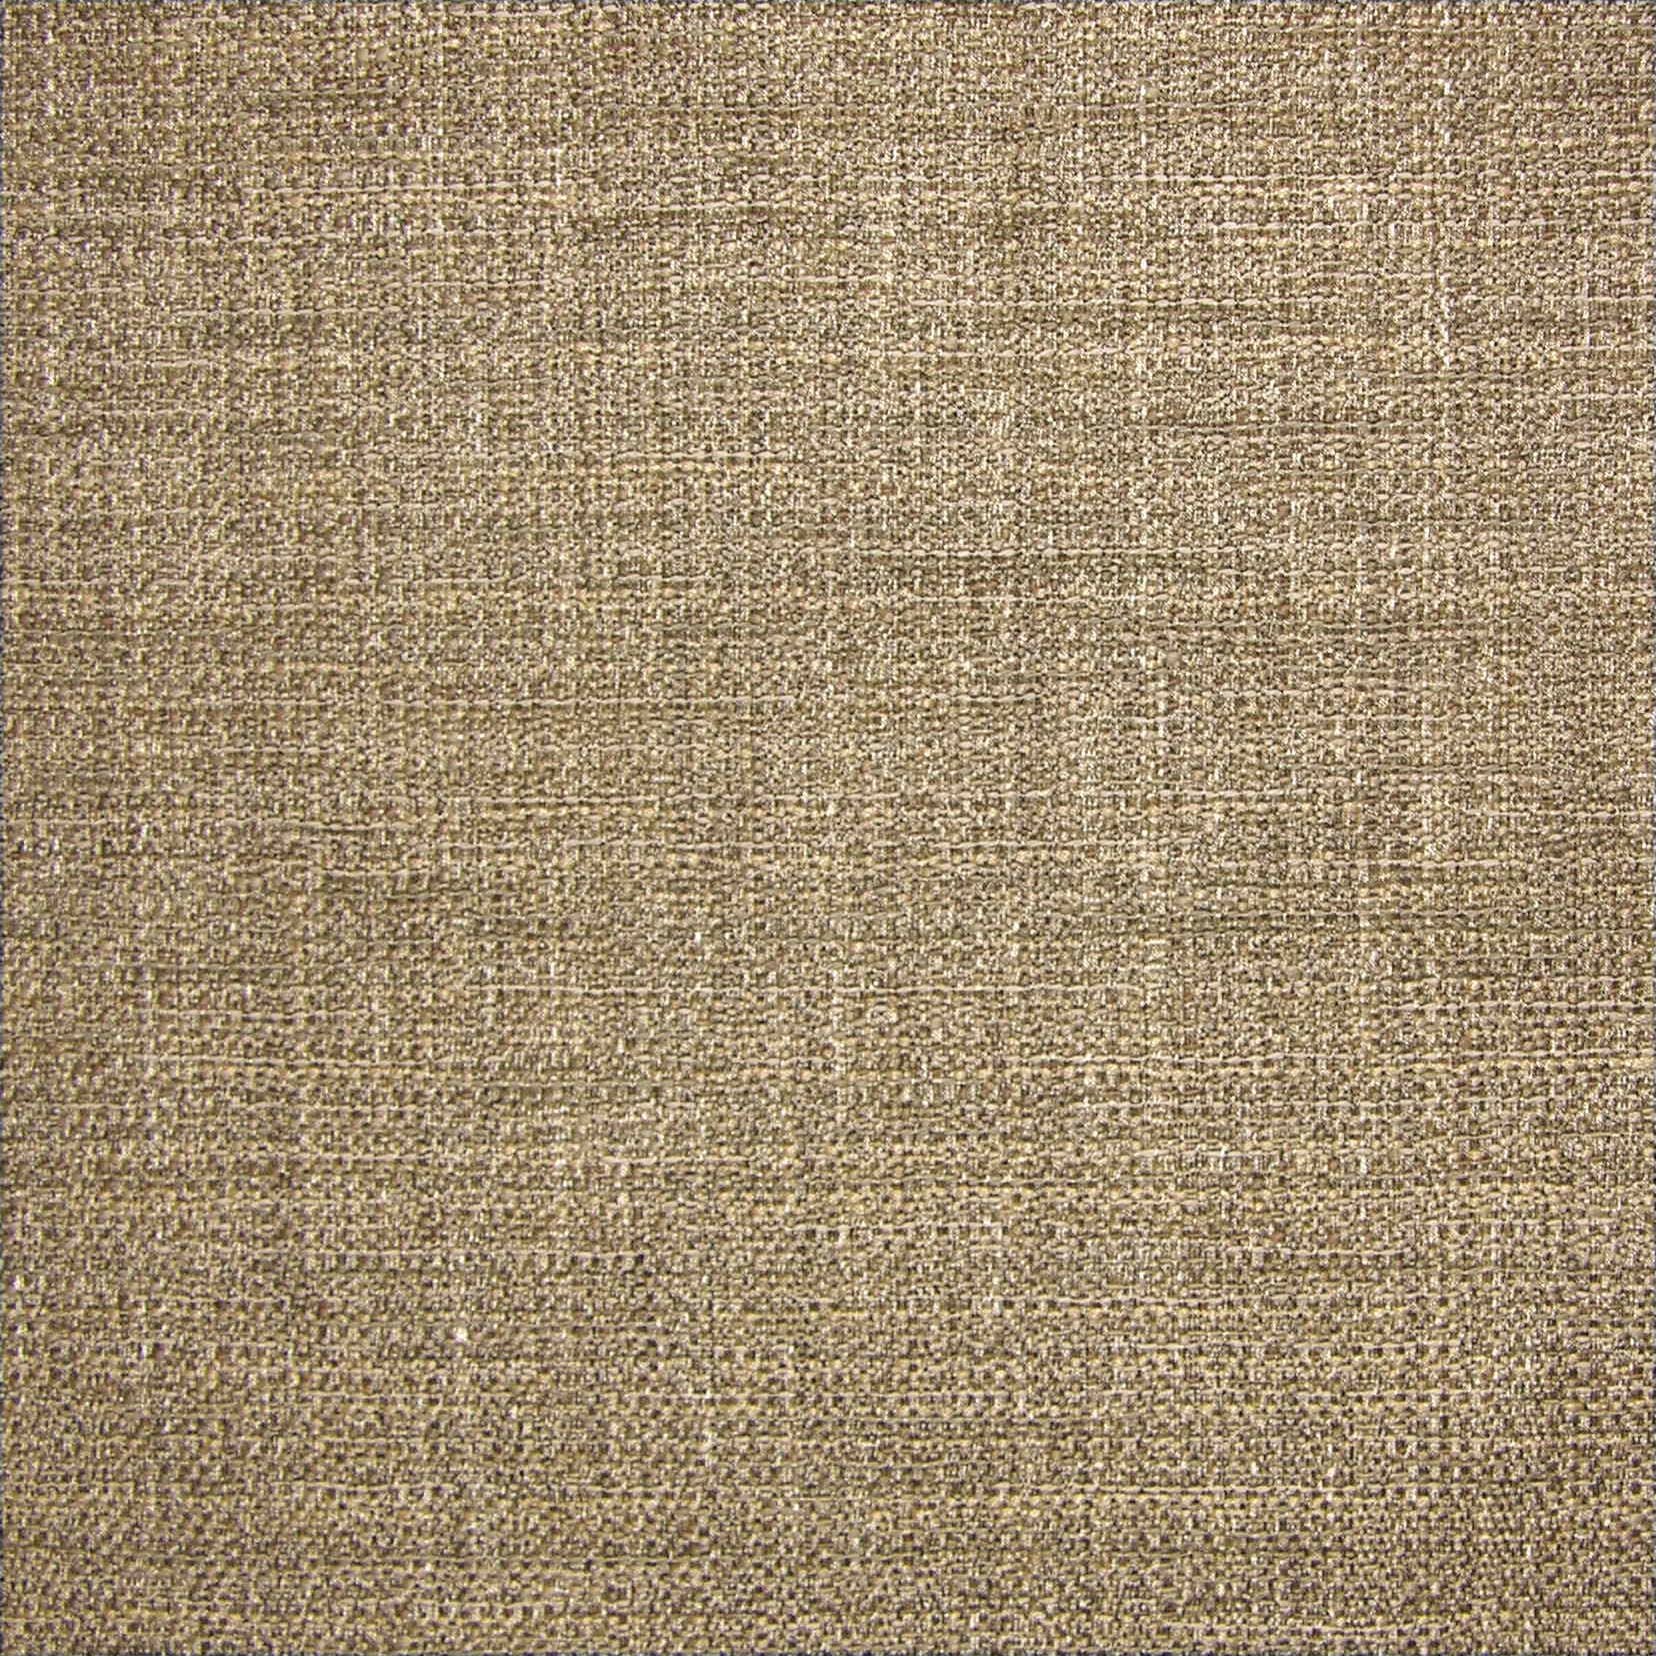 Liege Tweed fabric in sand color - pattern number AL 0022CDA4 - by Scalamandre in the Old World Weavers collection